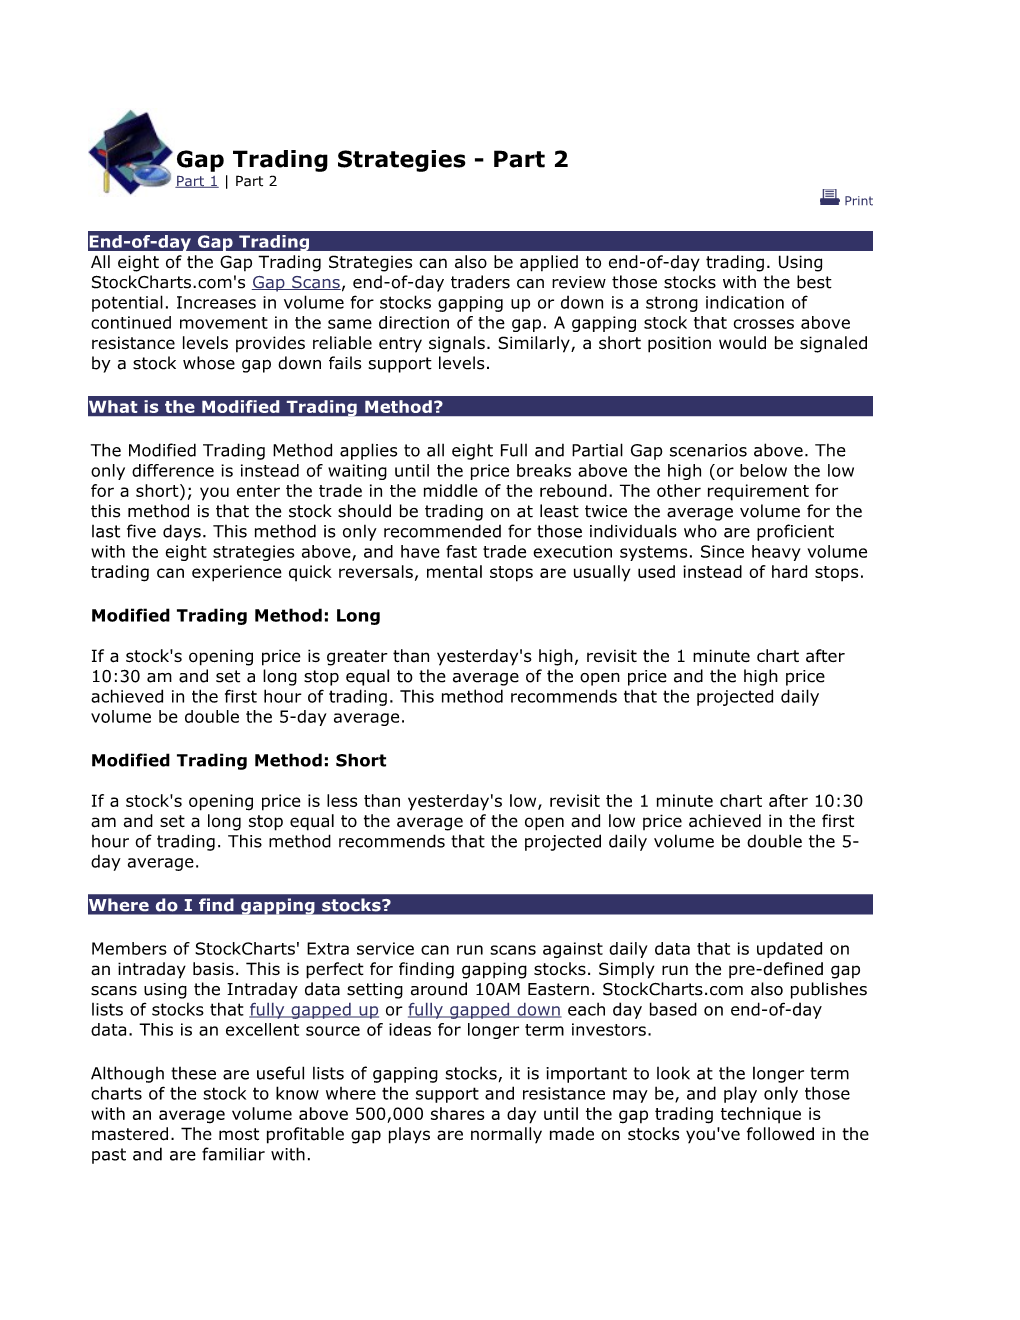 All Eight of the Gap Trading Strategies Can Also Be Applied to End-Of-Day Trading. Using